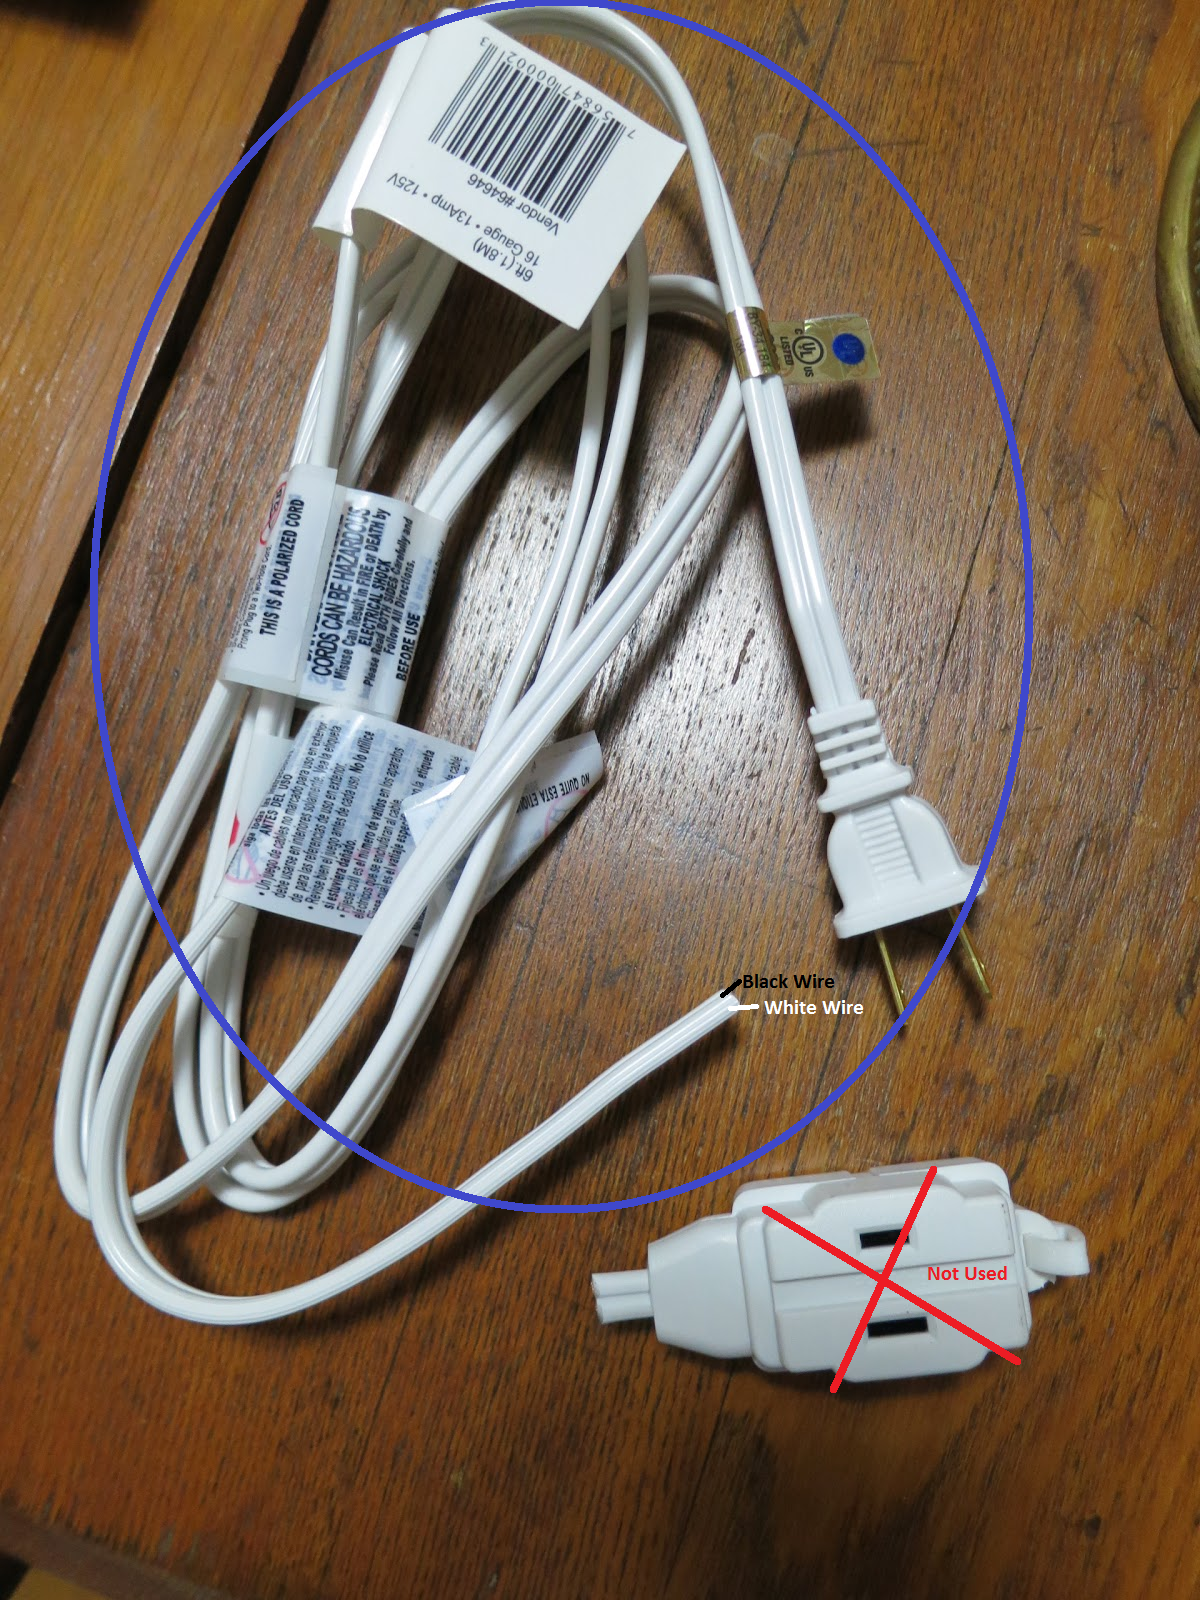 I used the extension cord as wires (the black and white ...